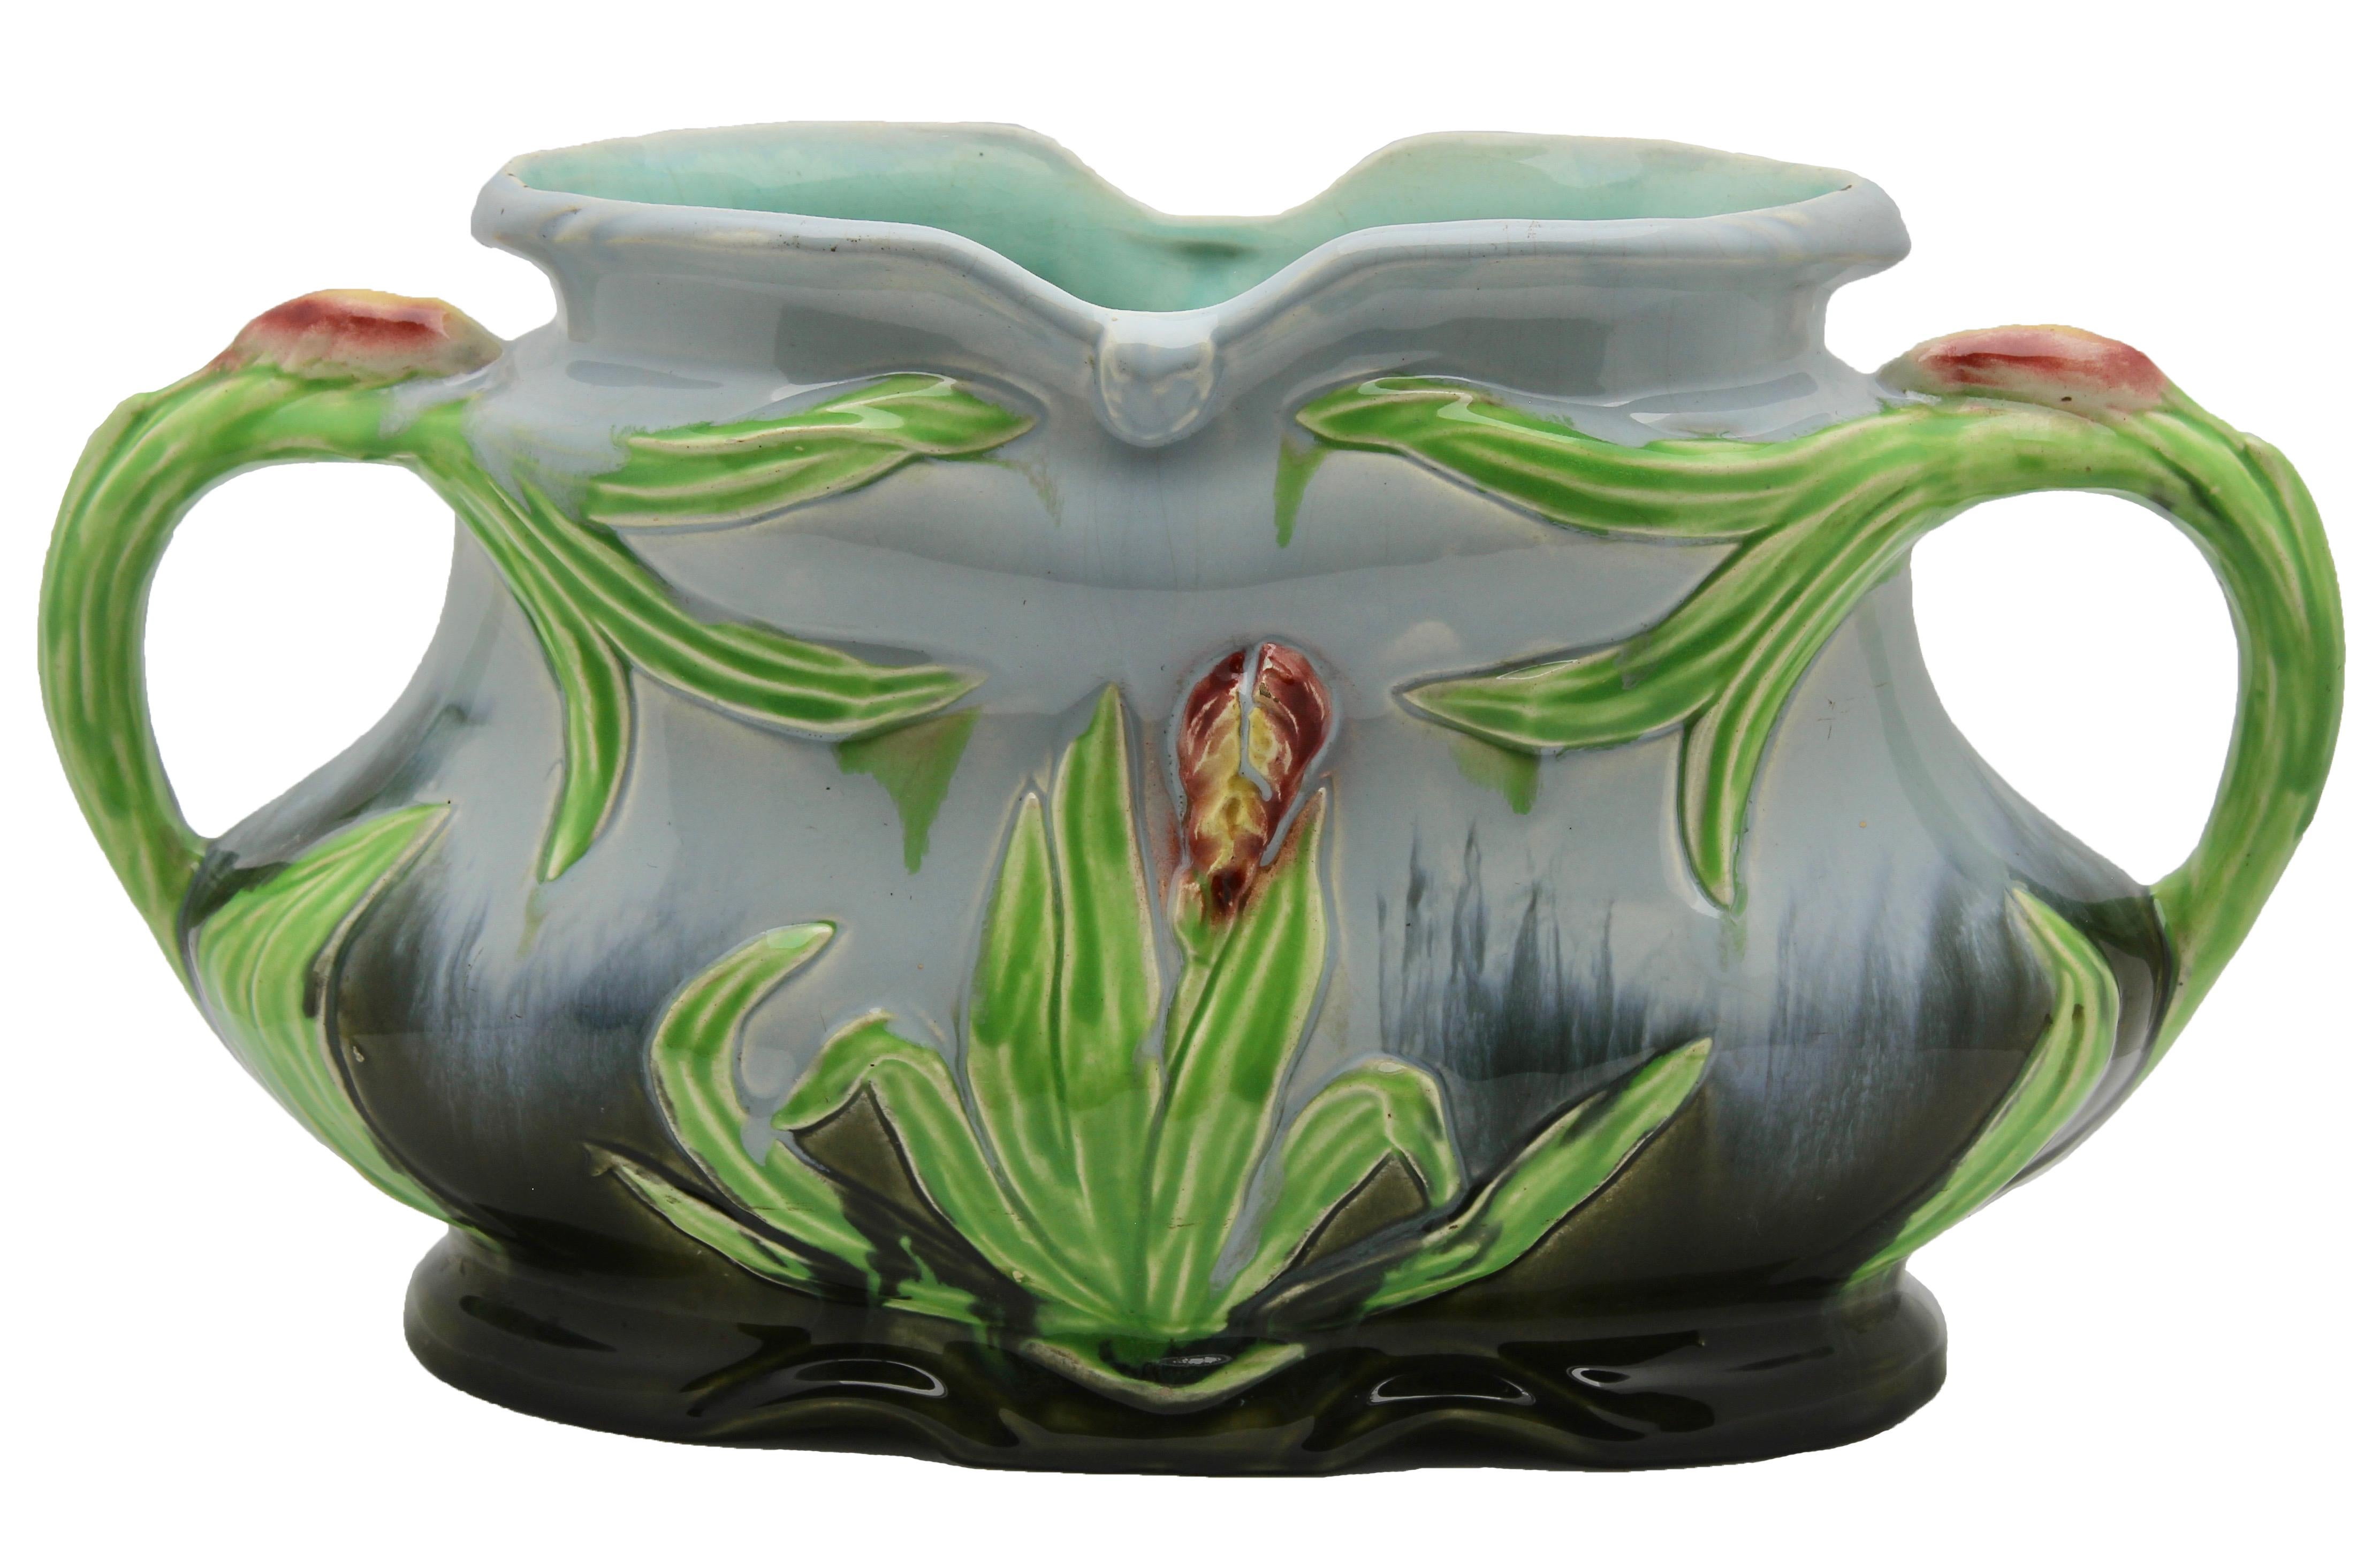 Majolica planter in barbotine technique with high relief, hand painted with flag-iris decoration
A colorful and Classic example for the side table or mantlepiece, comprises three pieces; two.
Similar upright vases with a larger jardiniere (or